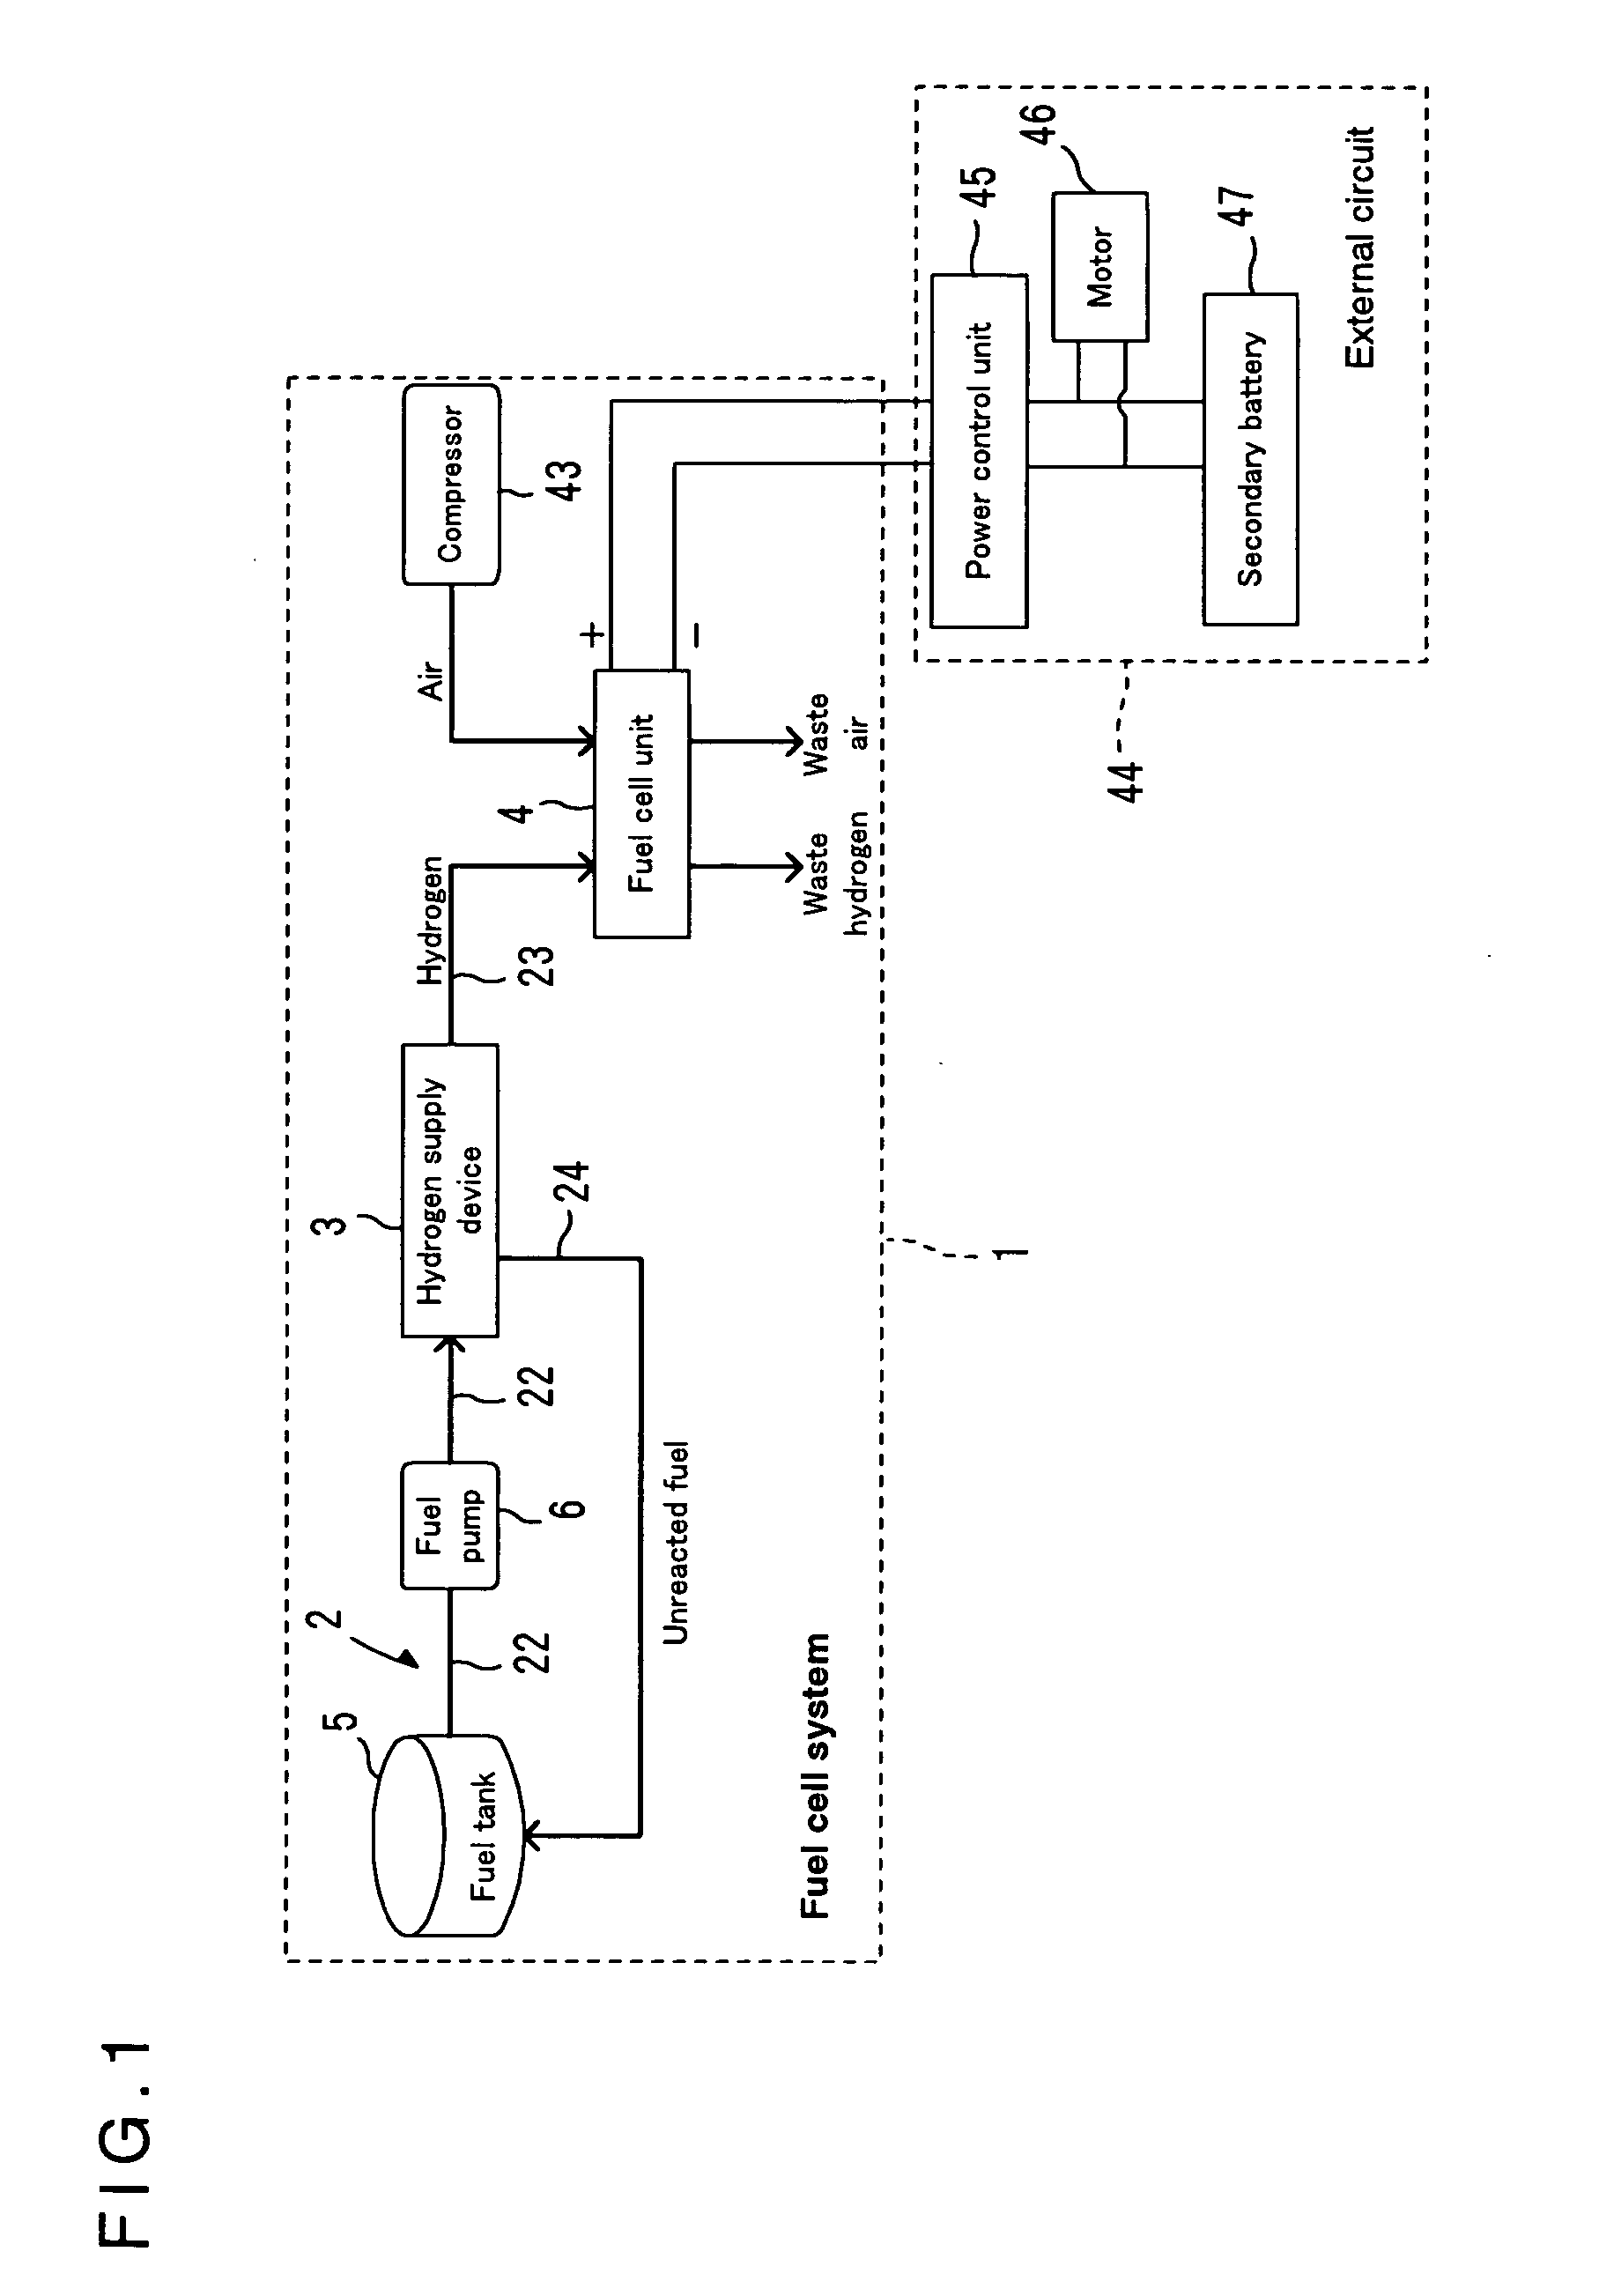 Hydrogen supply device and fuel-cell system